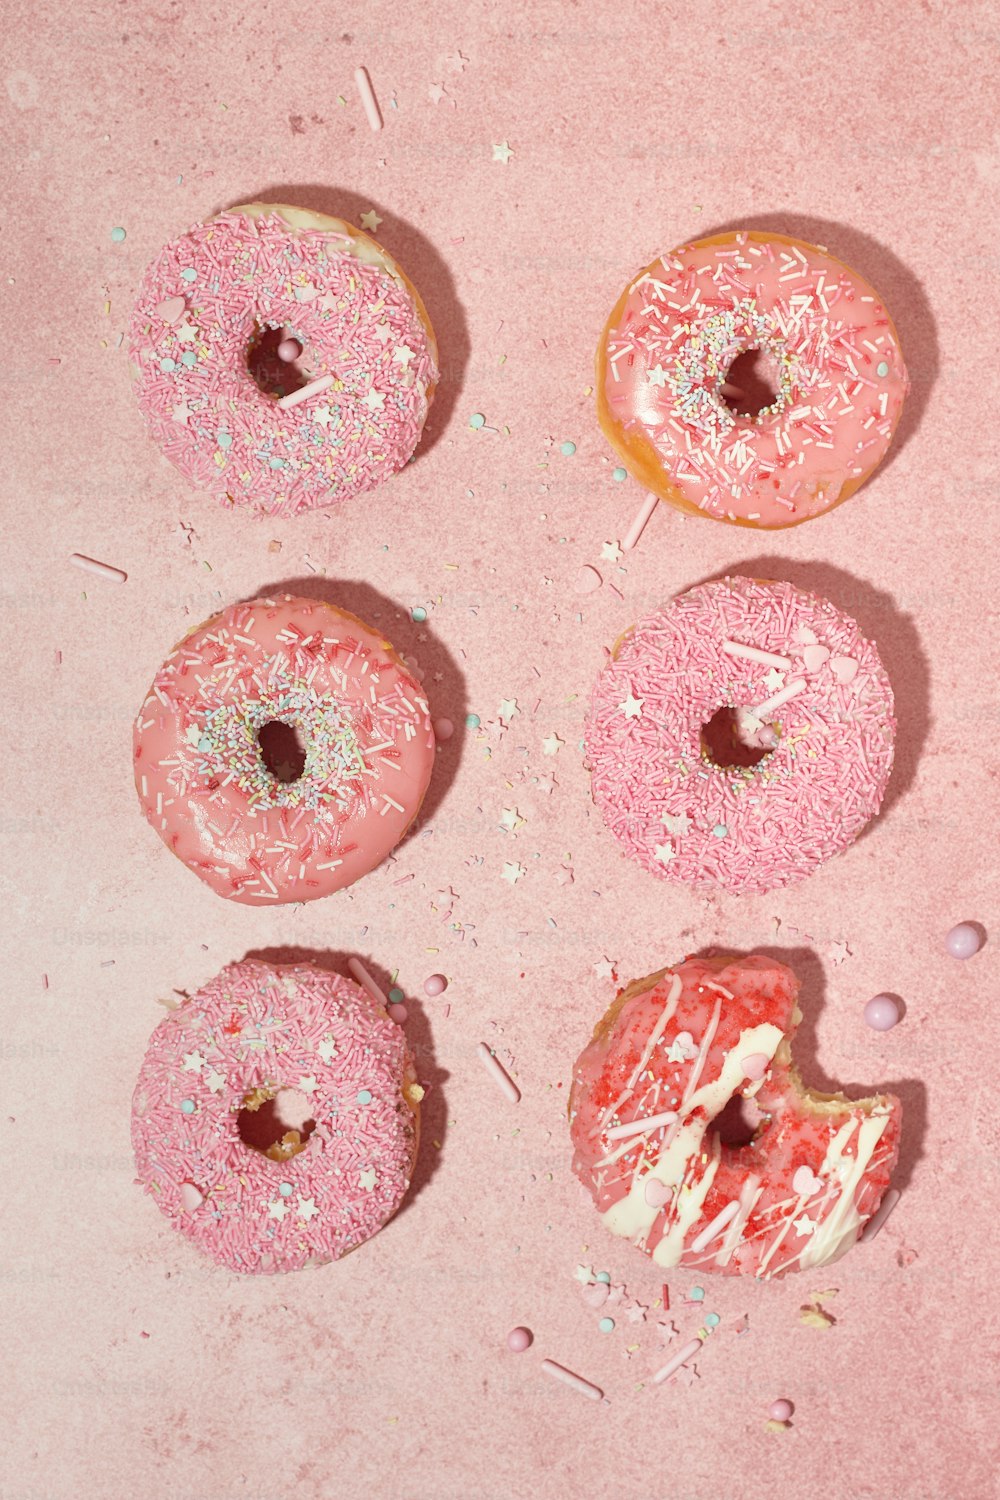 four donuts with pink frosting and sprinkles